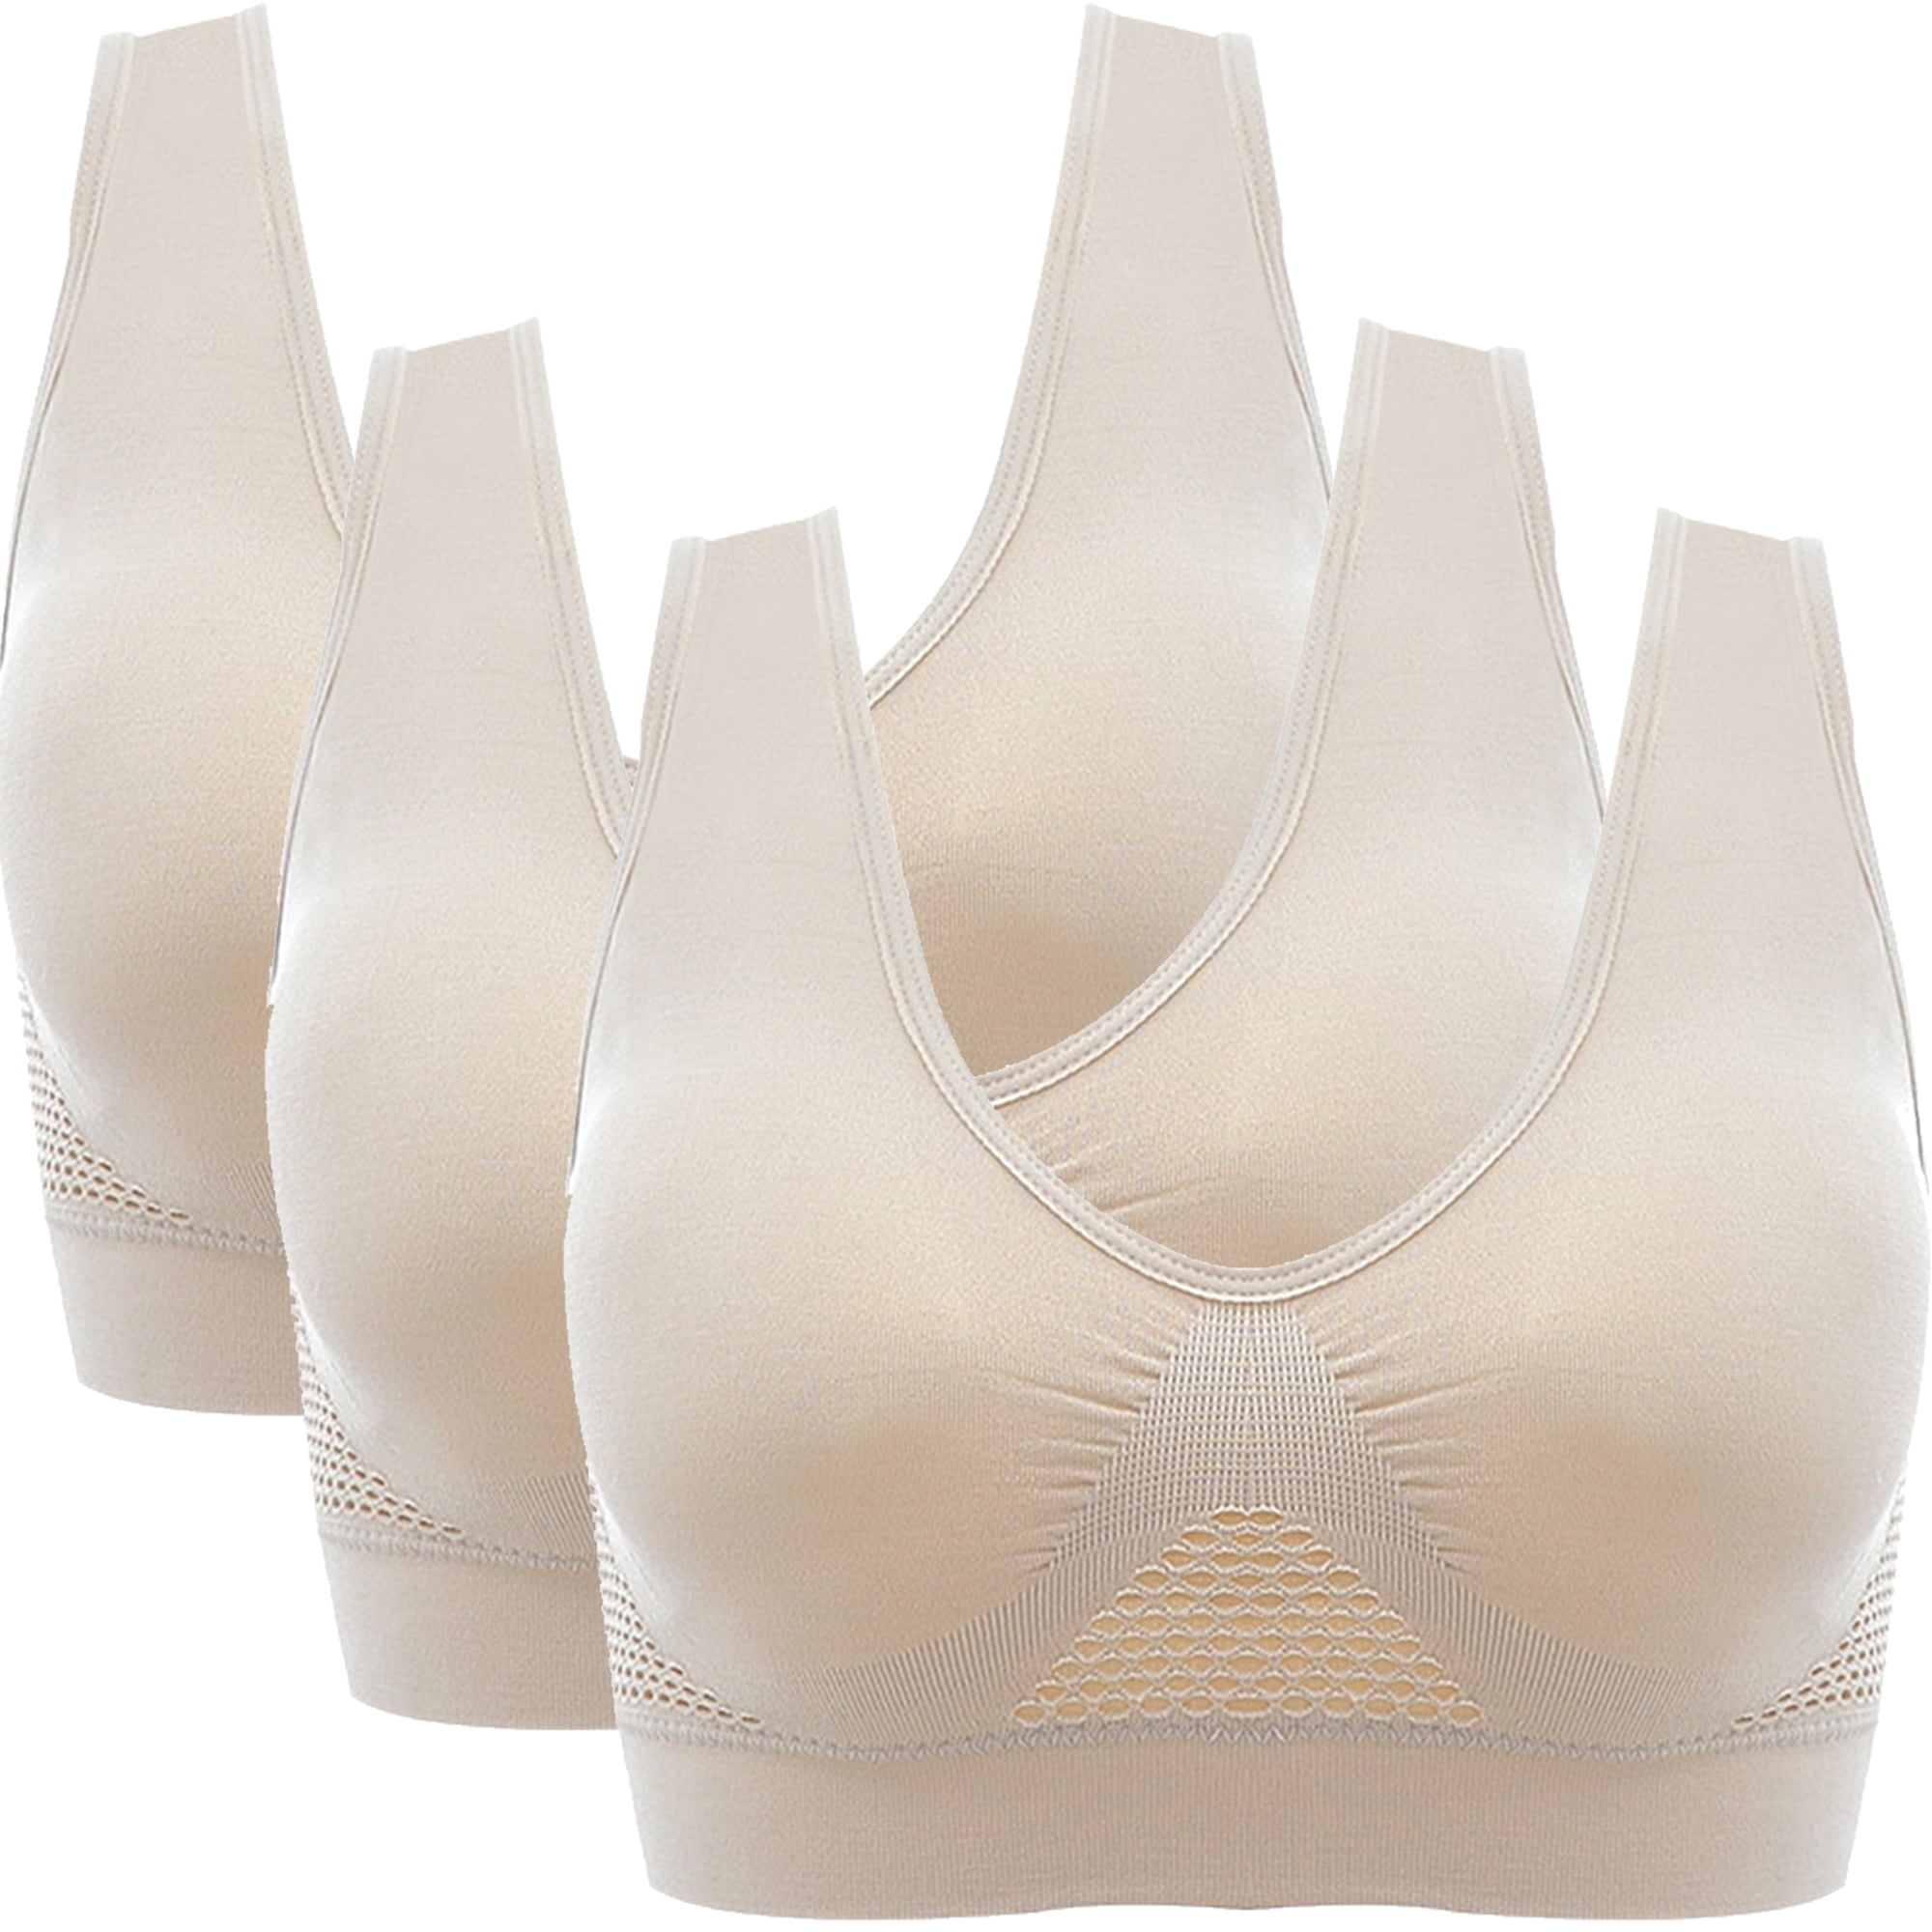 Elbourn 3 Pack Workout Tops Womens Sports Bras Yoga Comfort